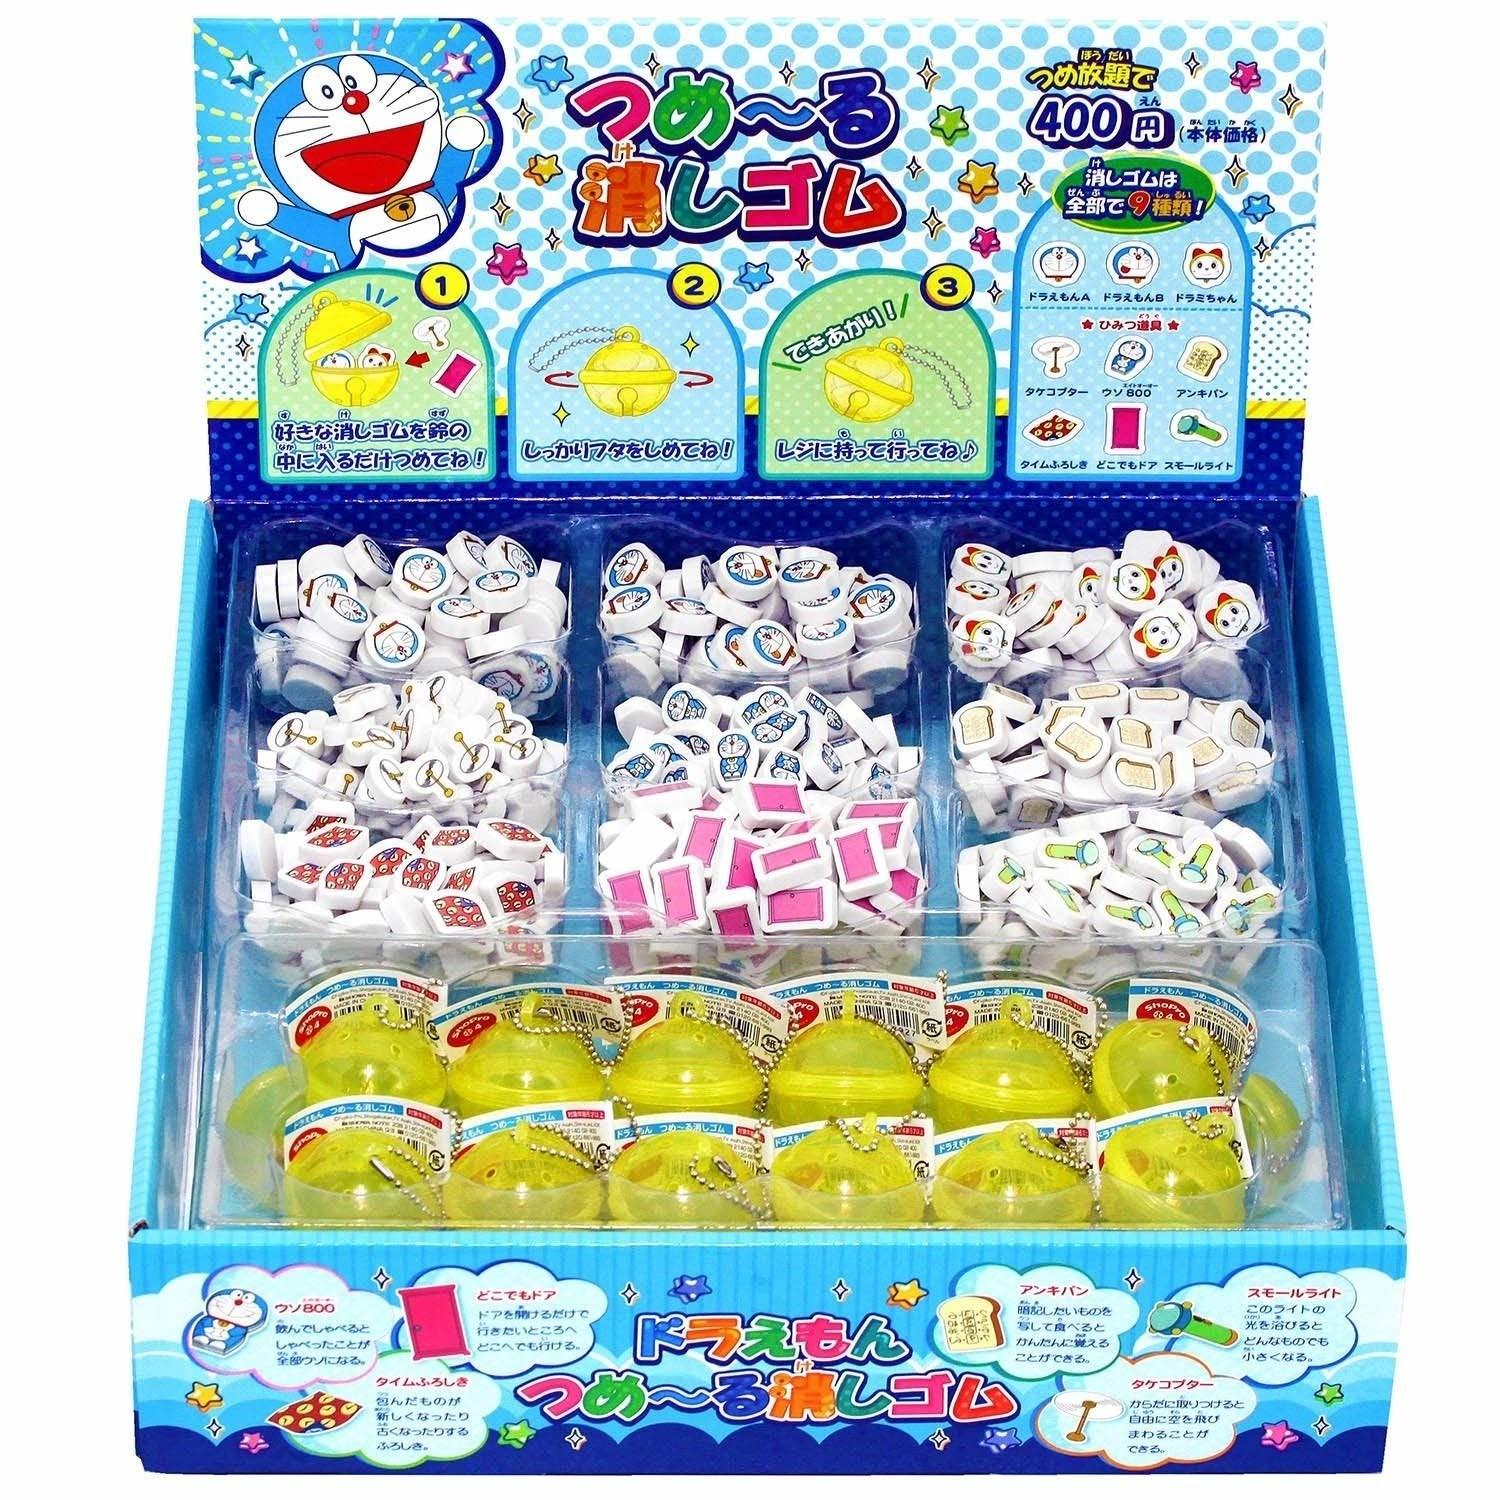 Showa note 238214002-1 Doraemon Props Time Towel Shrink Light Bamboo Dragonfly Memory Toast Eraser Wipe - CHL-STORE 